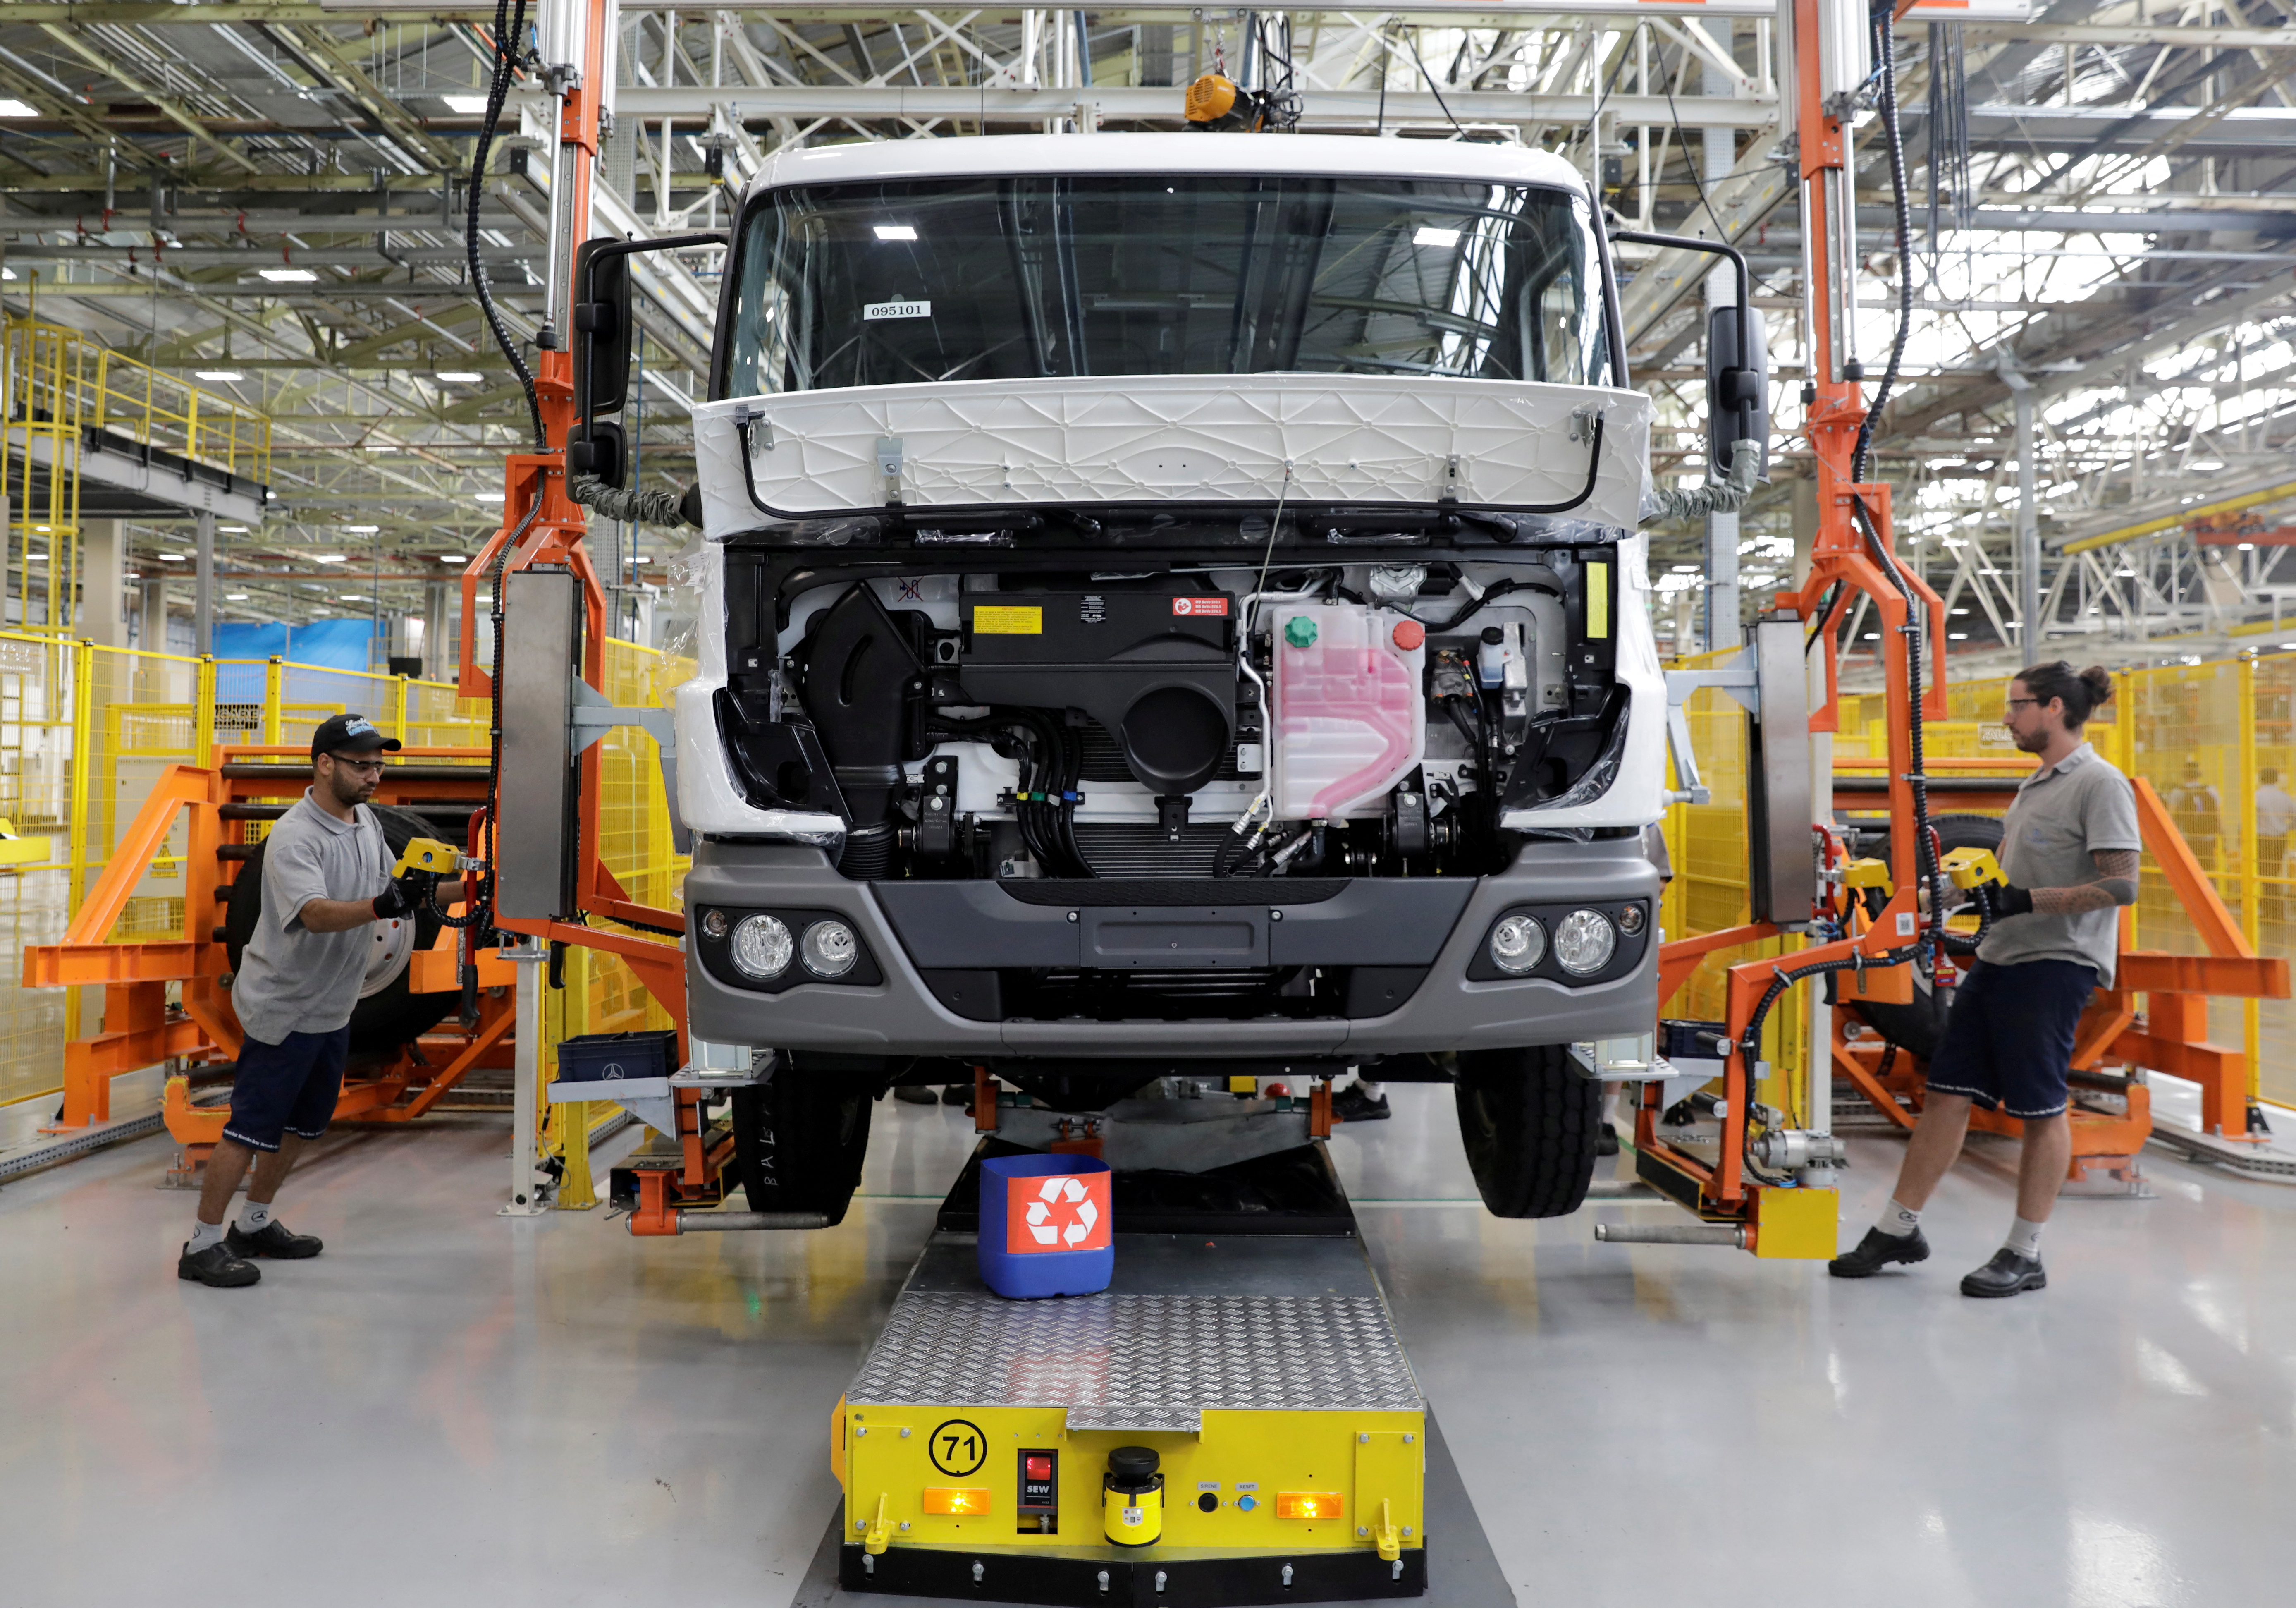 Employees work on the new assembly line to build trucks at Mercedes Benz's trucks and buses manufacturing plant in Sao Bernardo do Campo